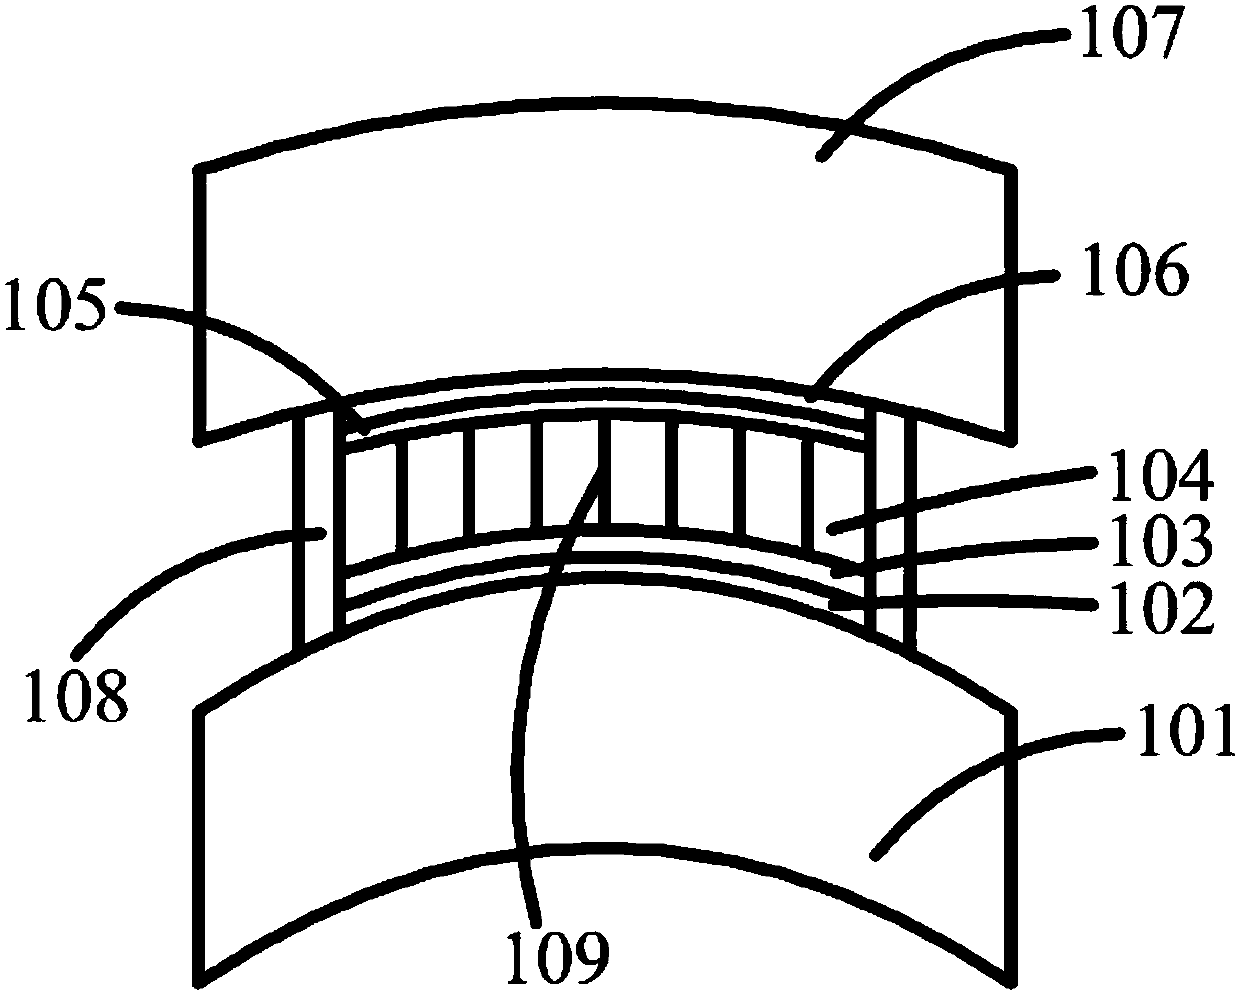 Double-diopter spectacles based on birefringence of liquid crystal